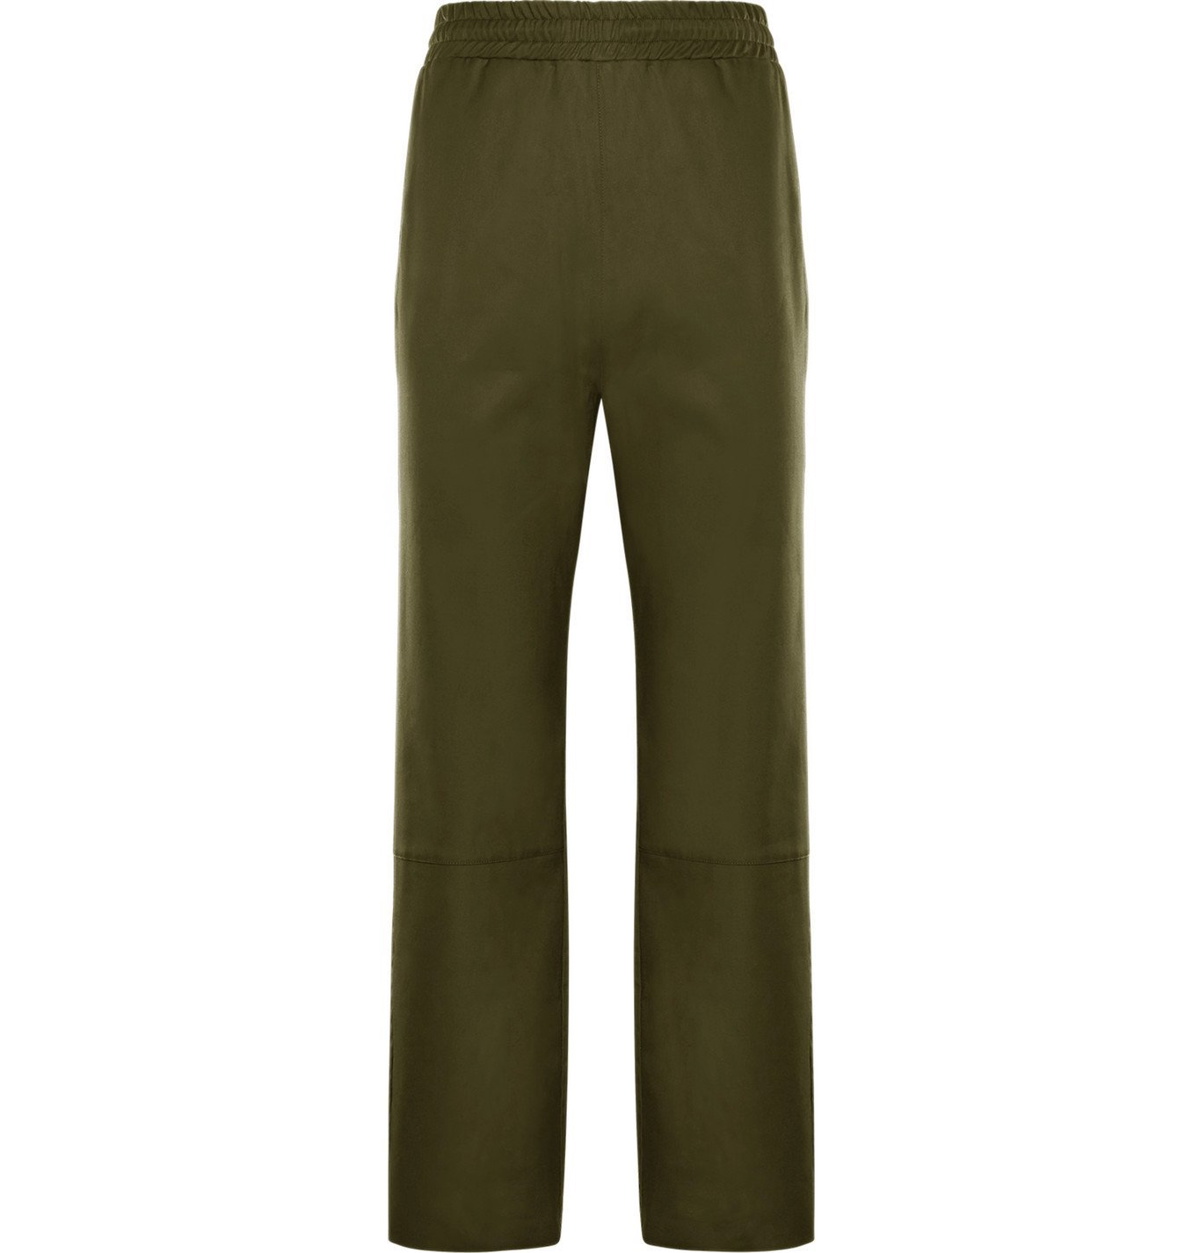 Moncler Genius - Cotton-Shell Trousers - Green